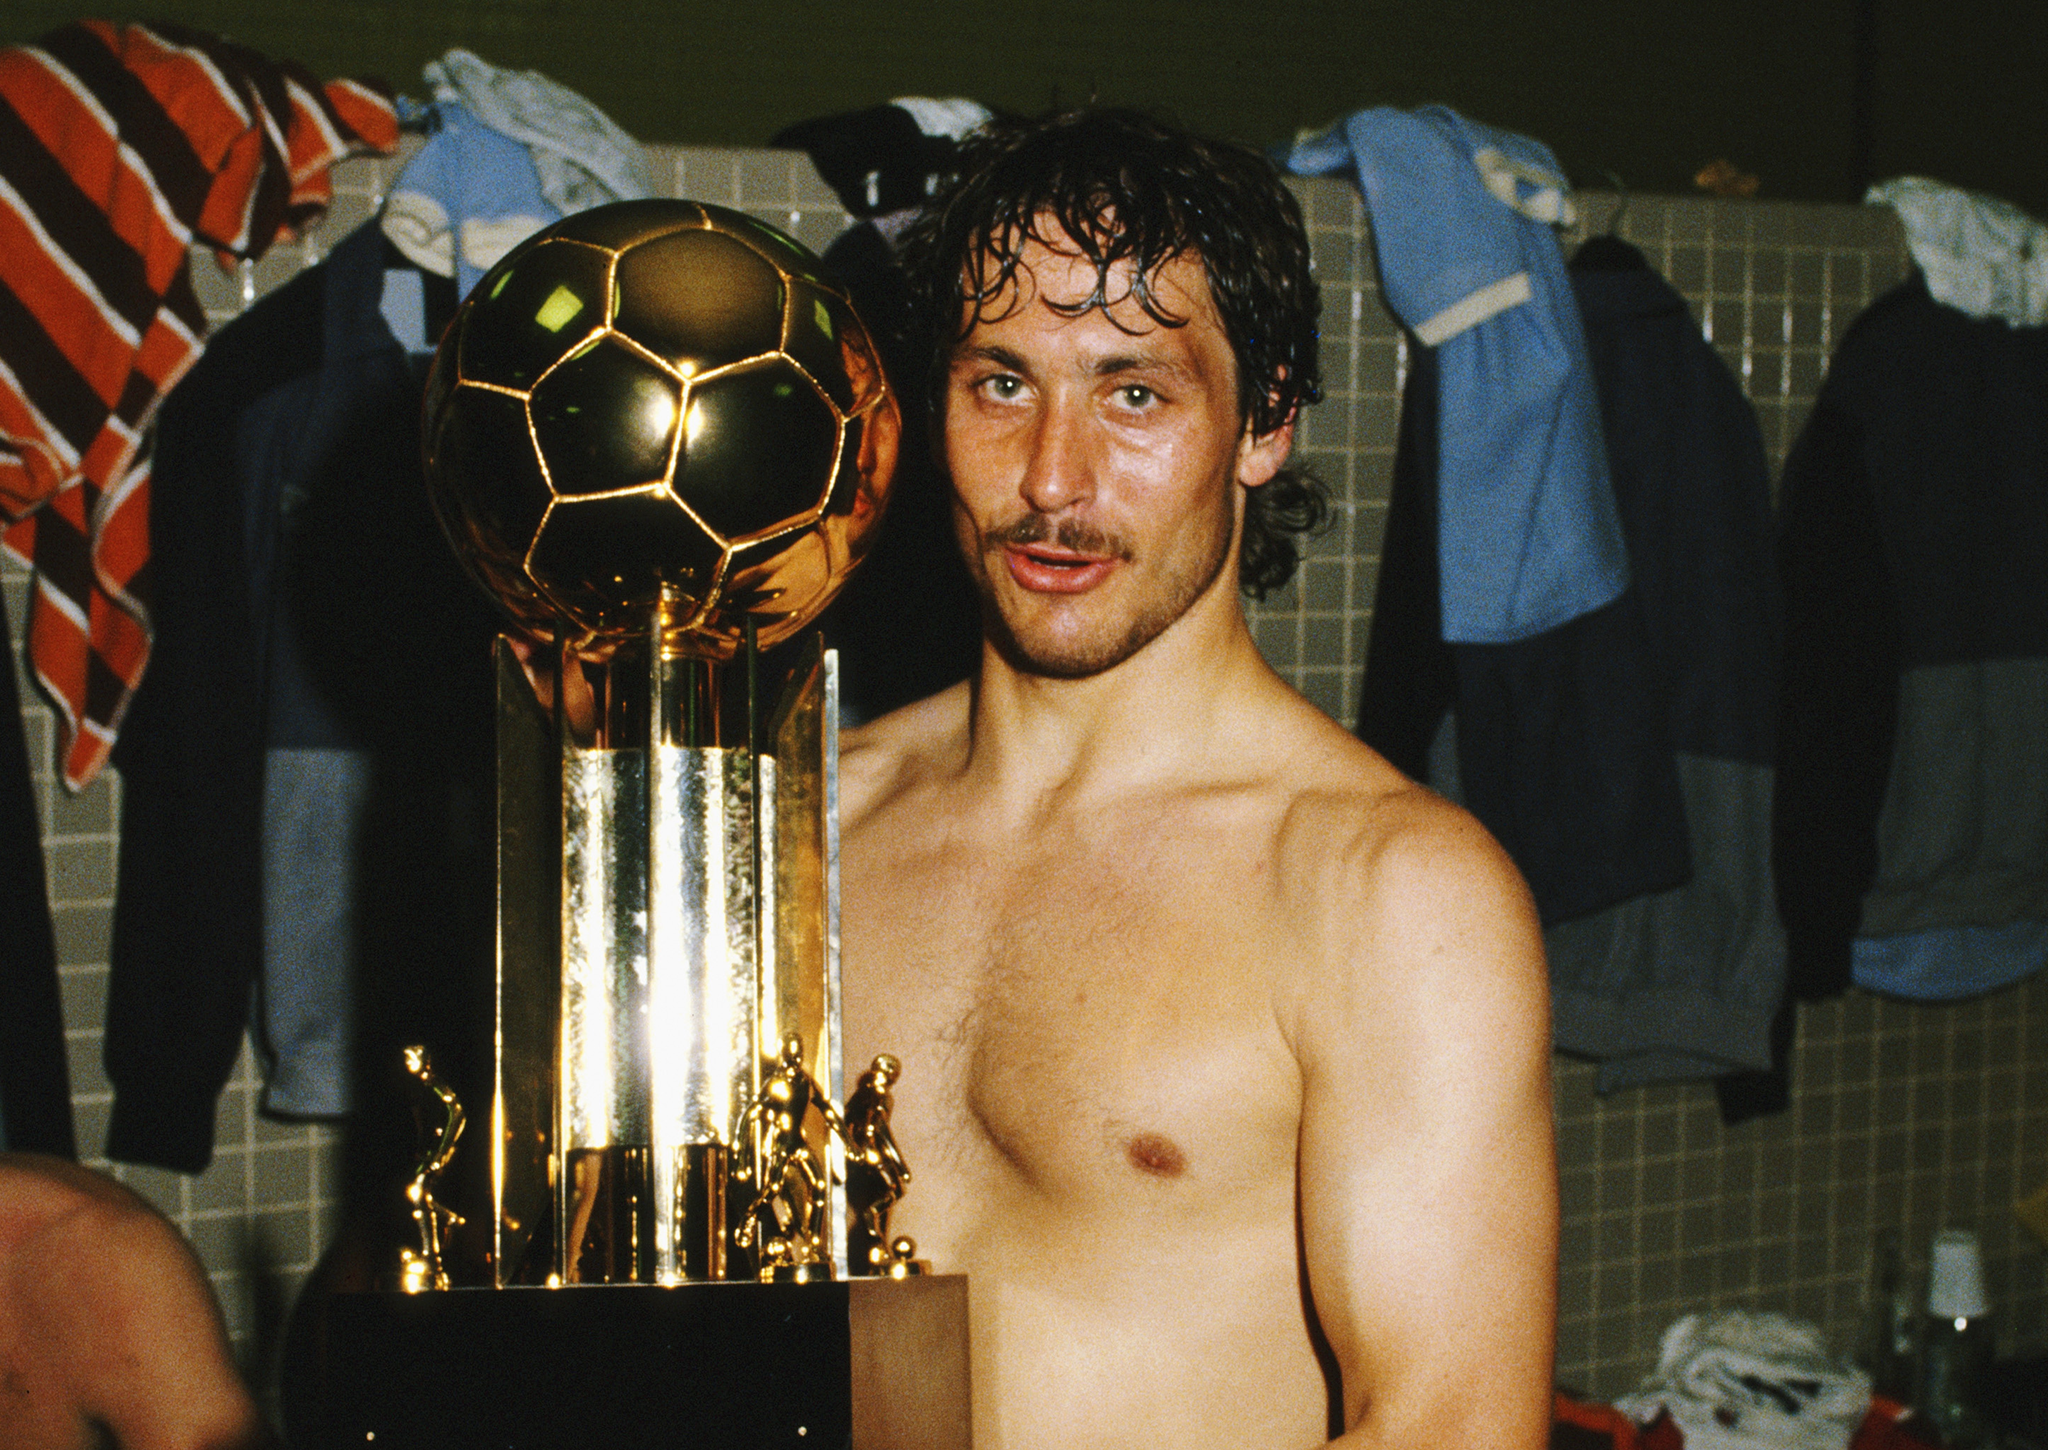 England defender Kenny Sansom pictured in the dressing room with the trophy after a 2-0 win over Brazil at the Maracana on June 10, 1984 in Rio de Janeiro, Brazil